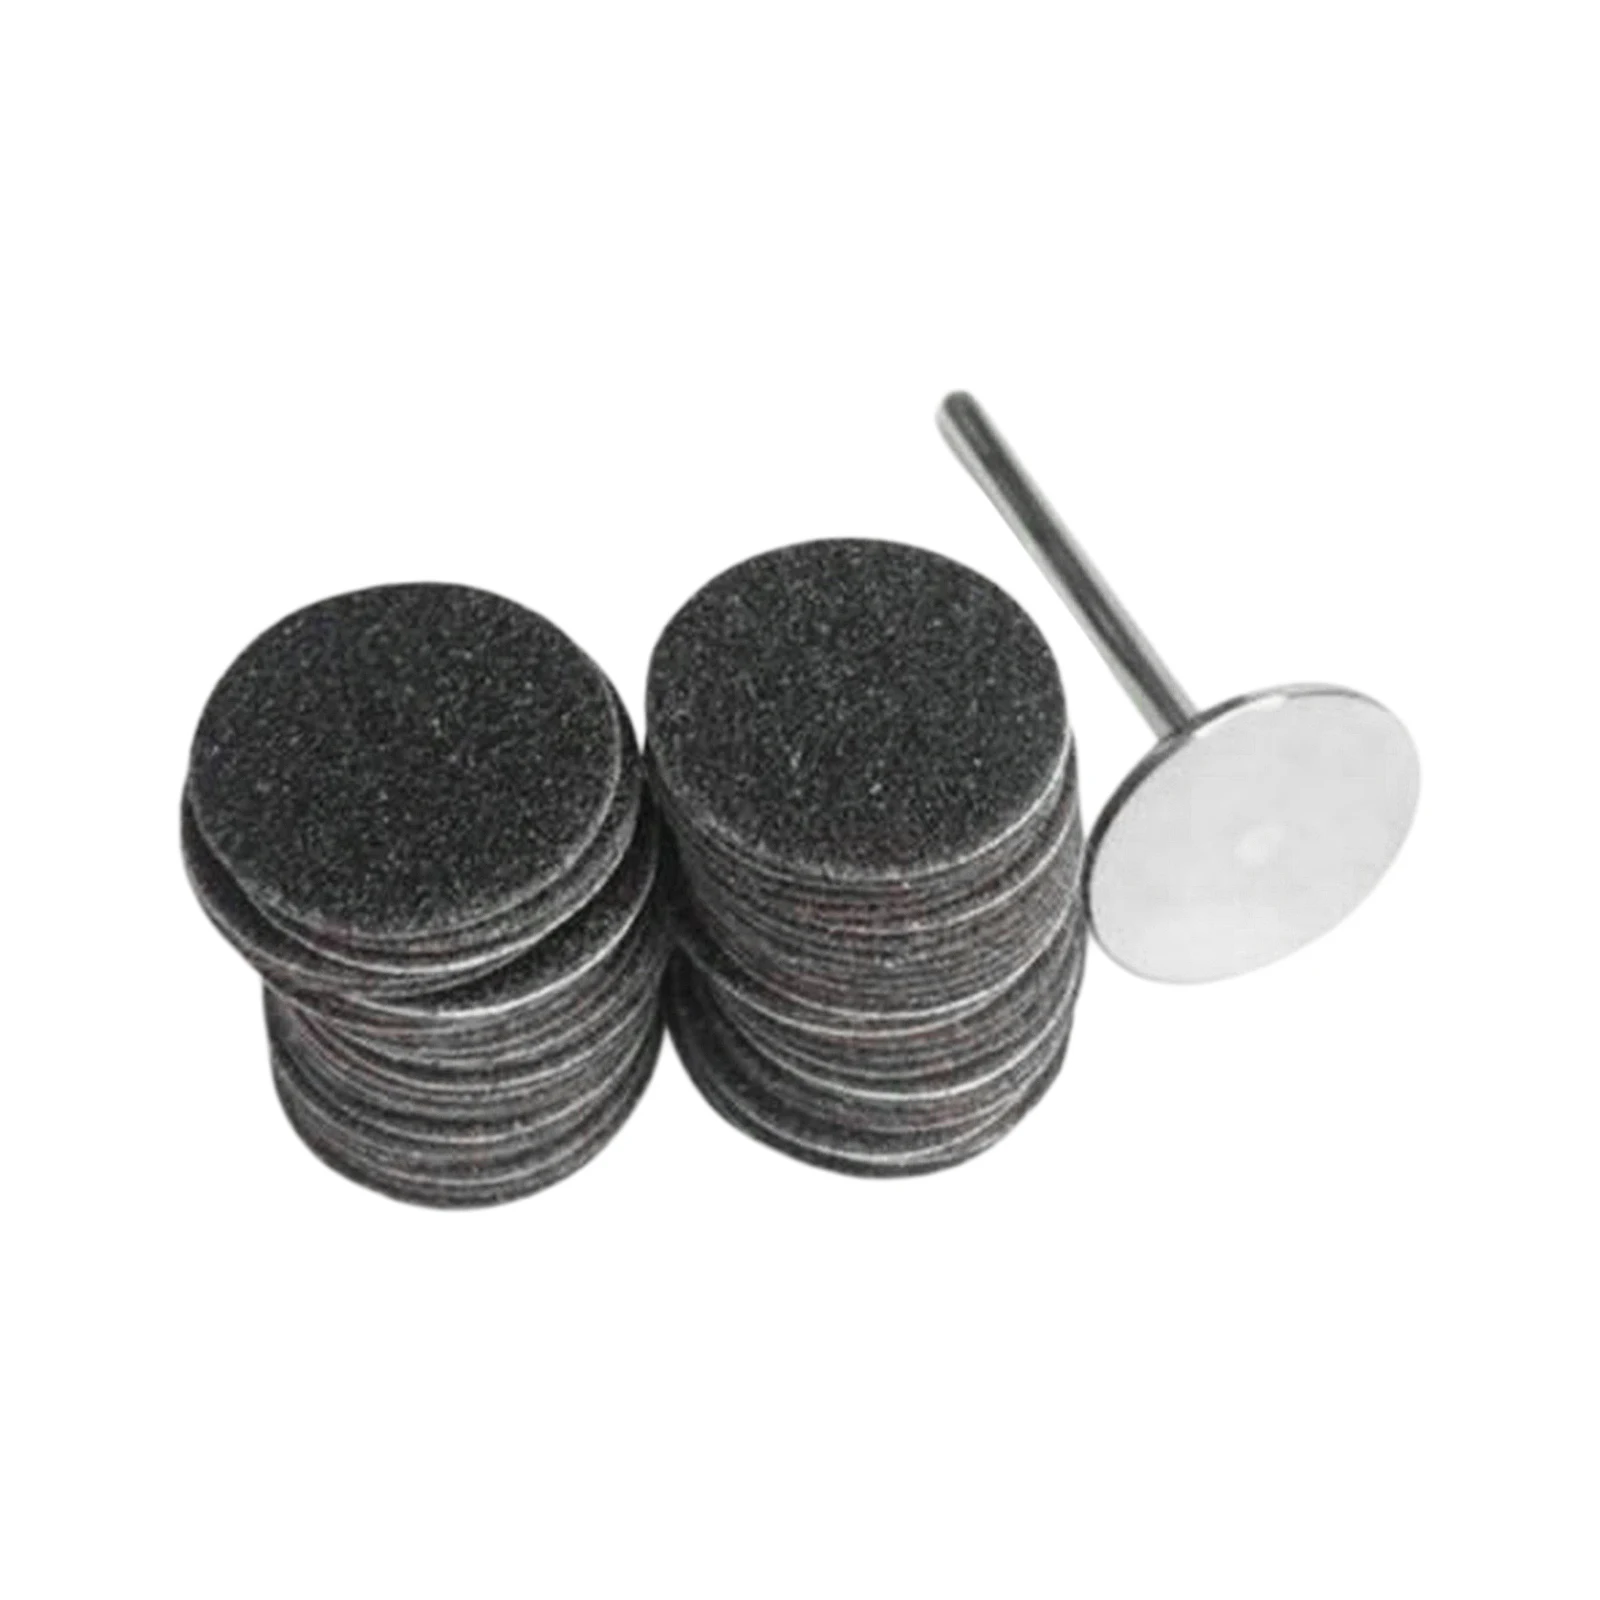 Replacement Sandpaper Discs for Polishing Craft or Electric Callus Remover Pedicure Tool